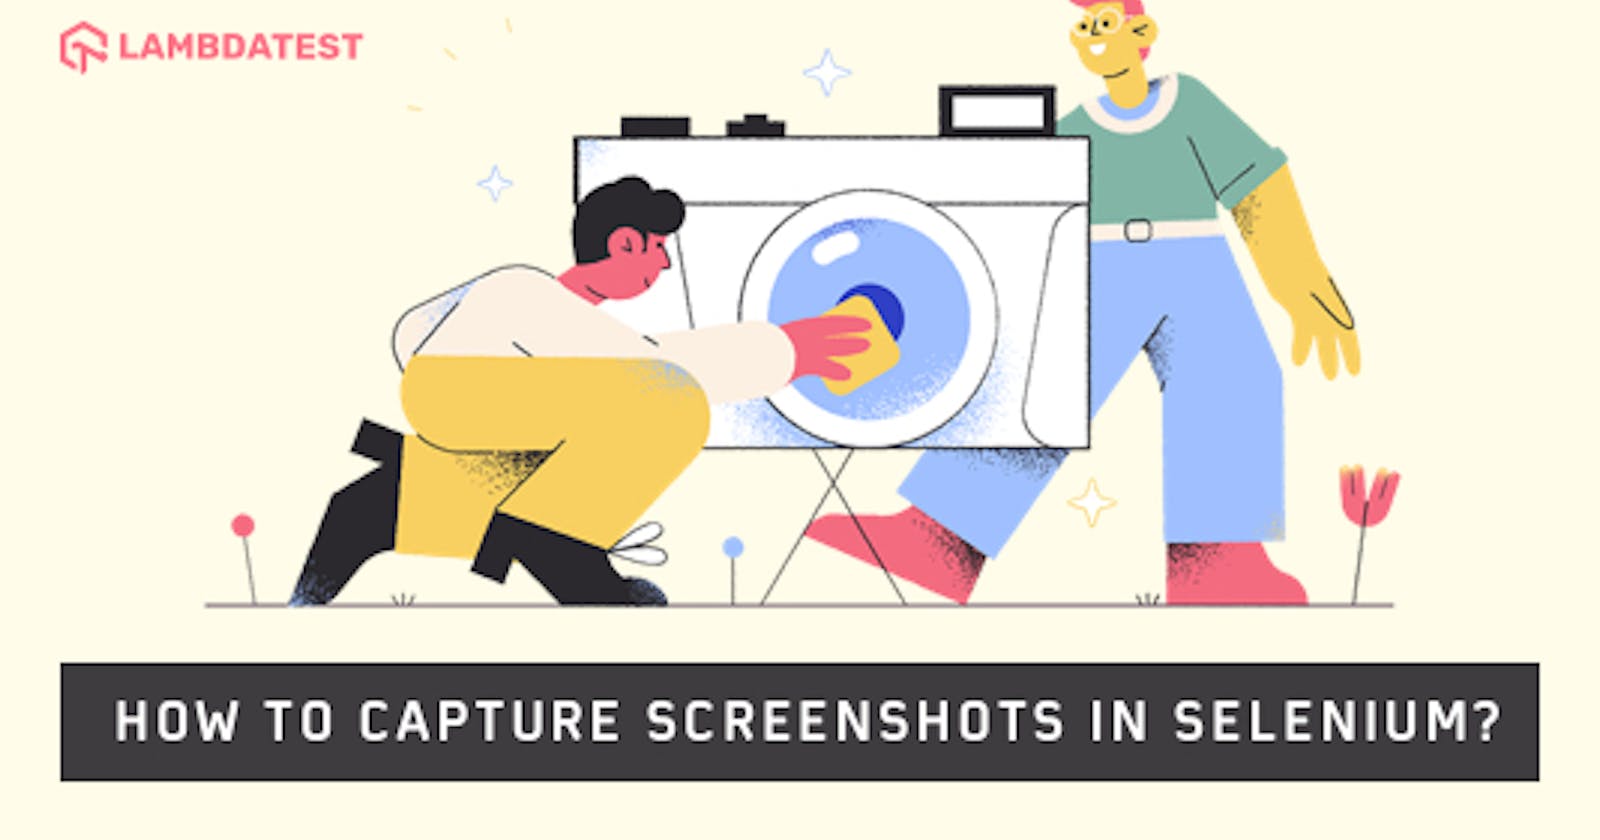 How To Capture Screenshots In Selenium? Guide With Examples